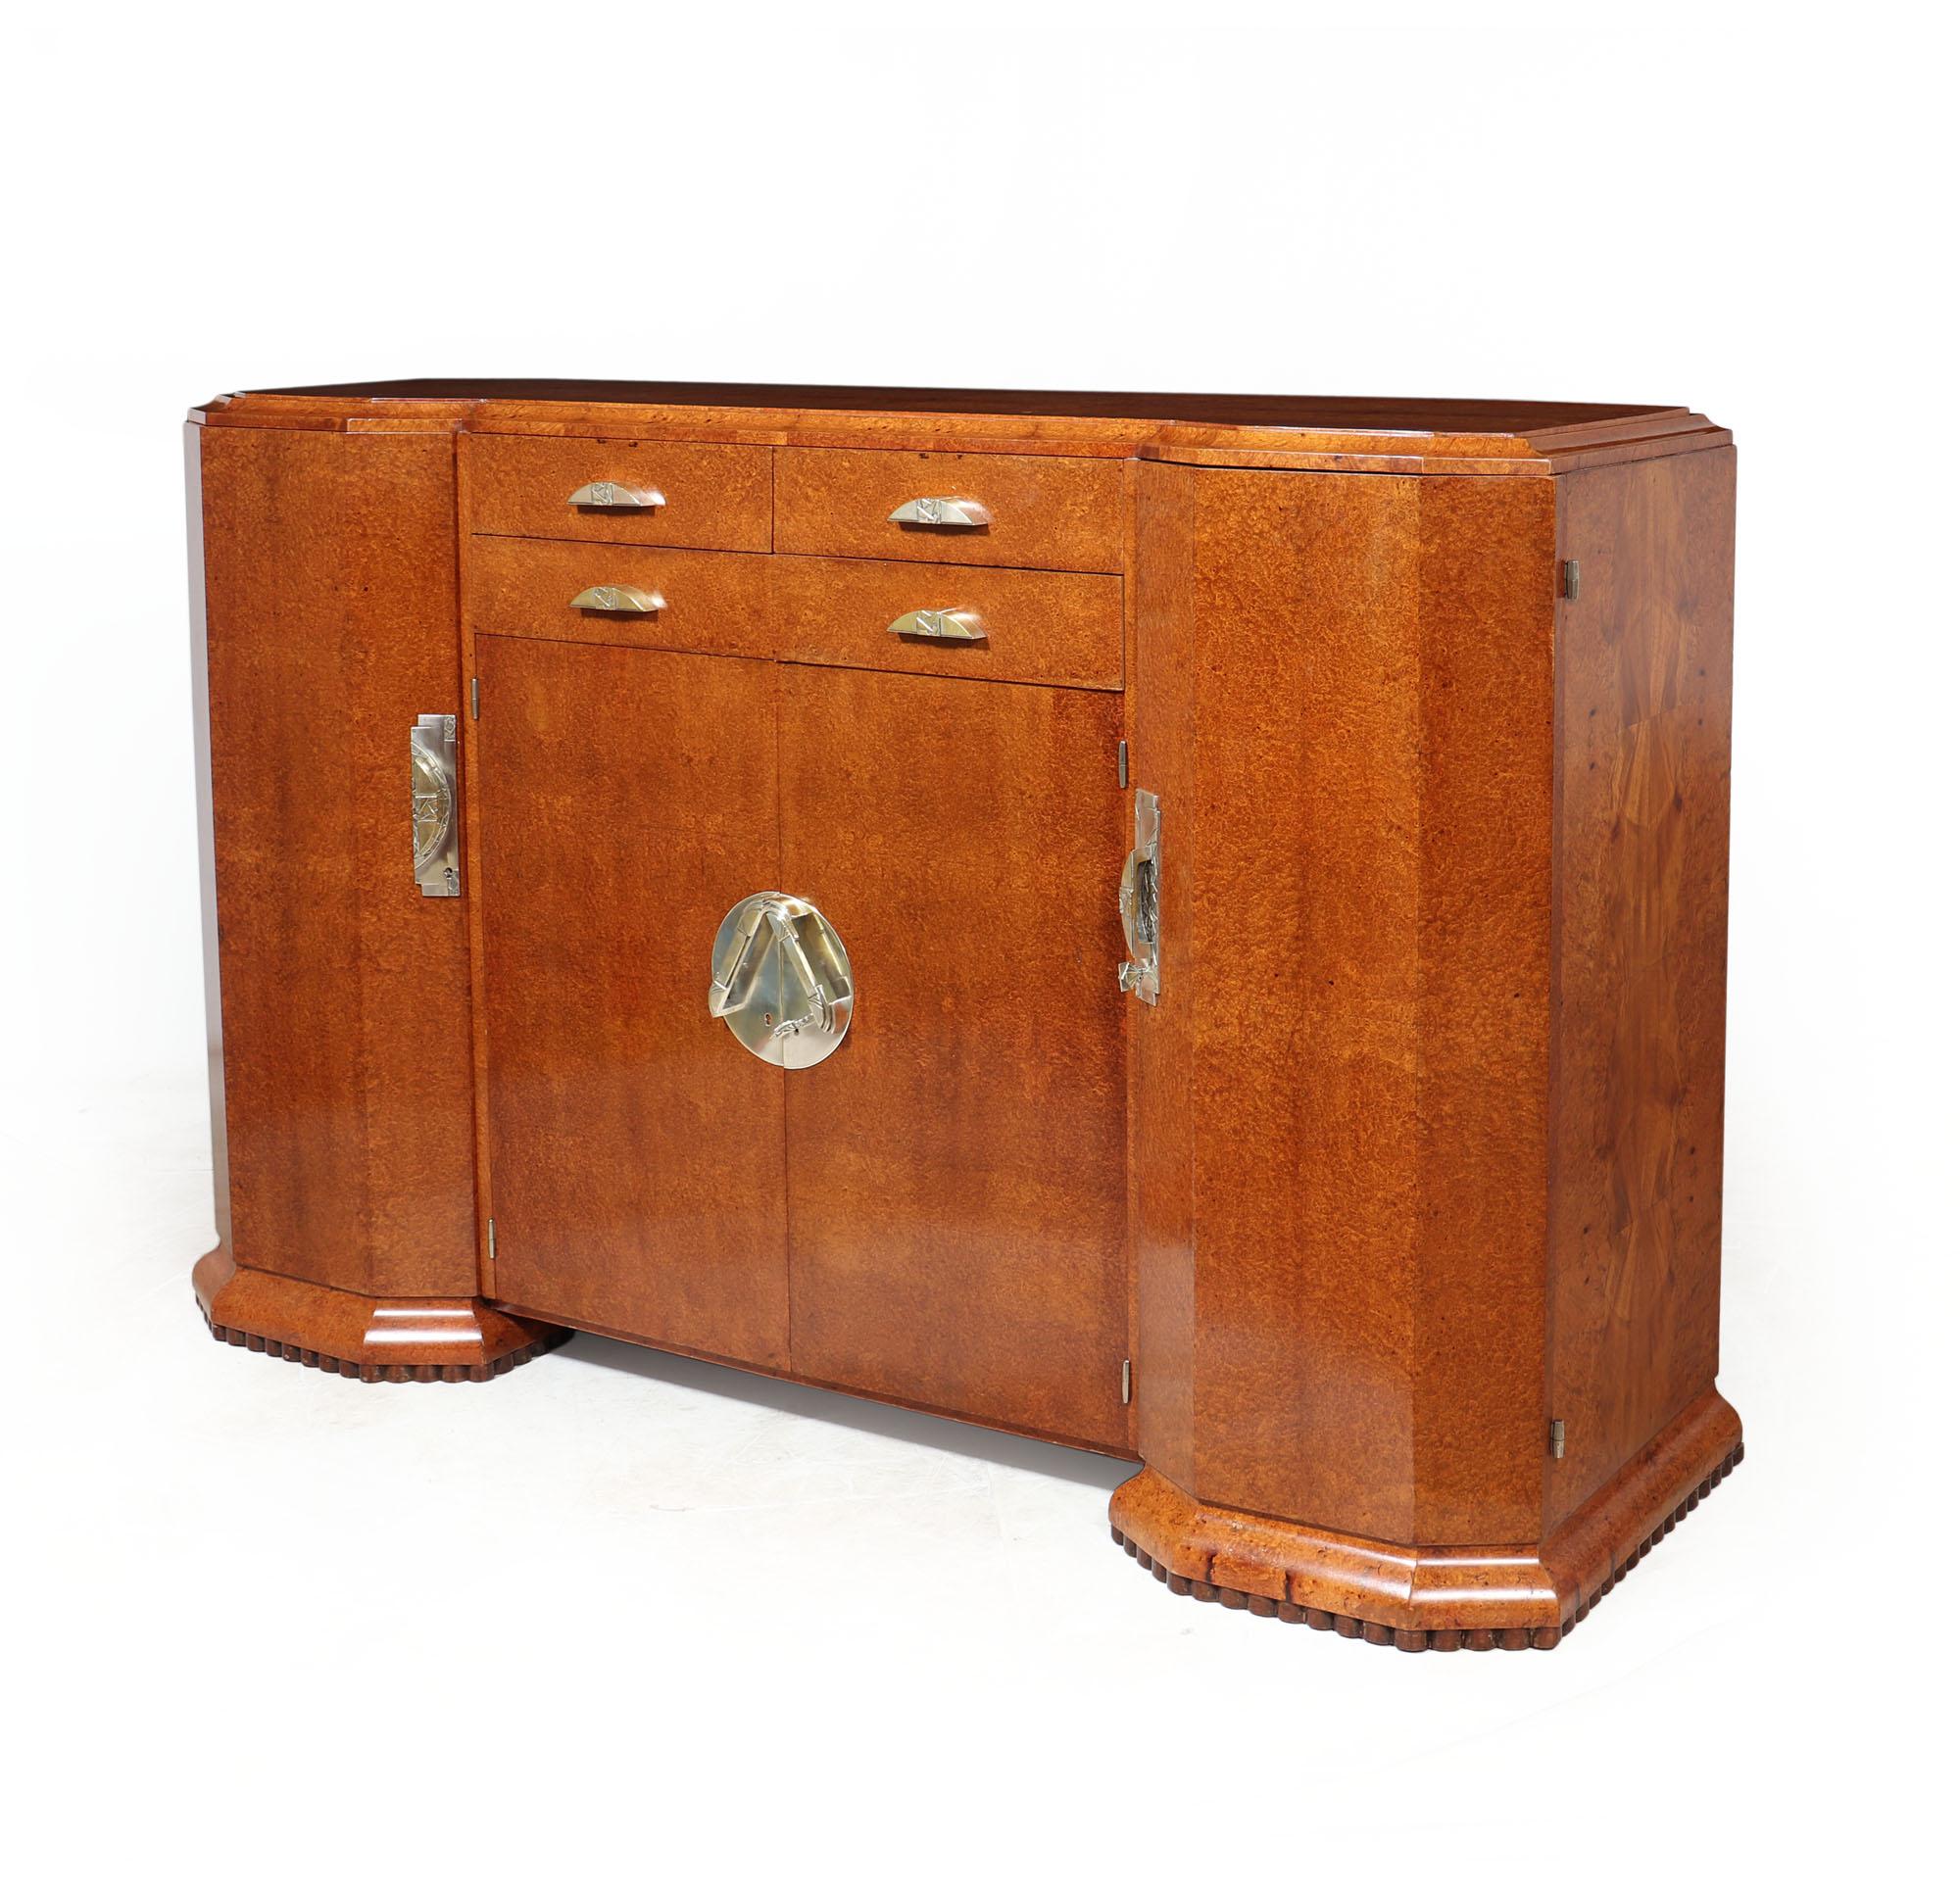 French Art Deco Sideboard in Amboyna In Excellent Condition For Sale In Paddock Wood Tonbridge, GB